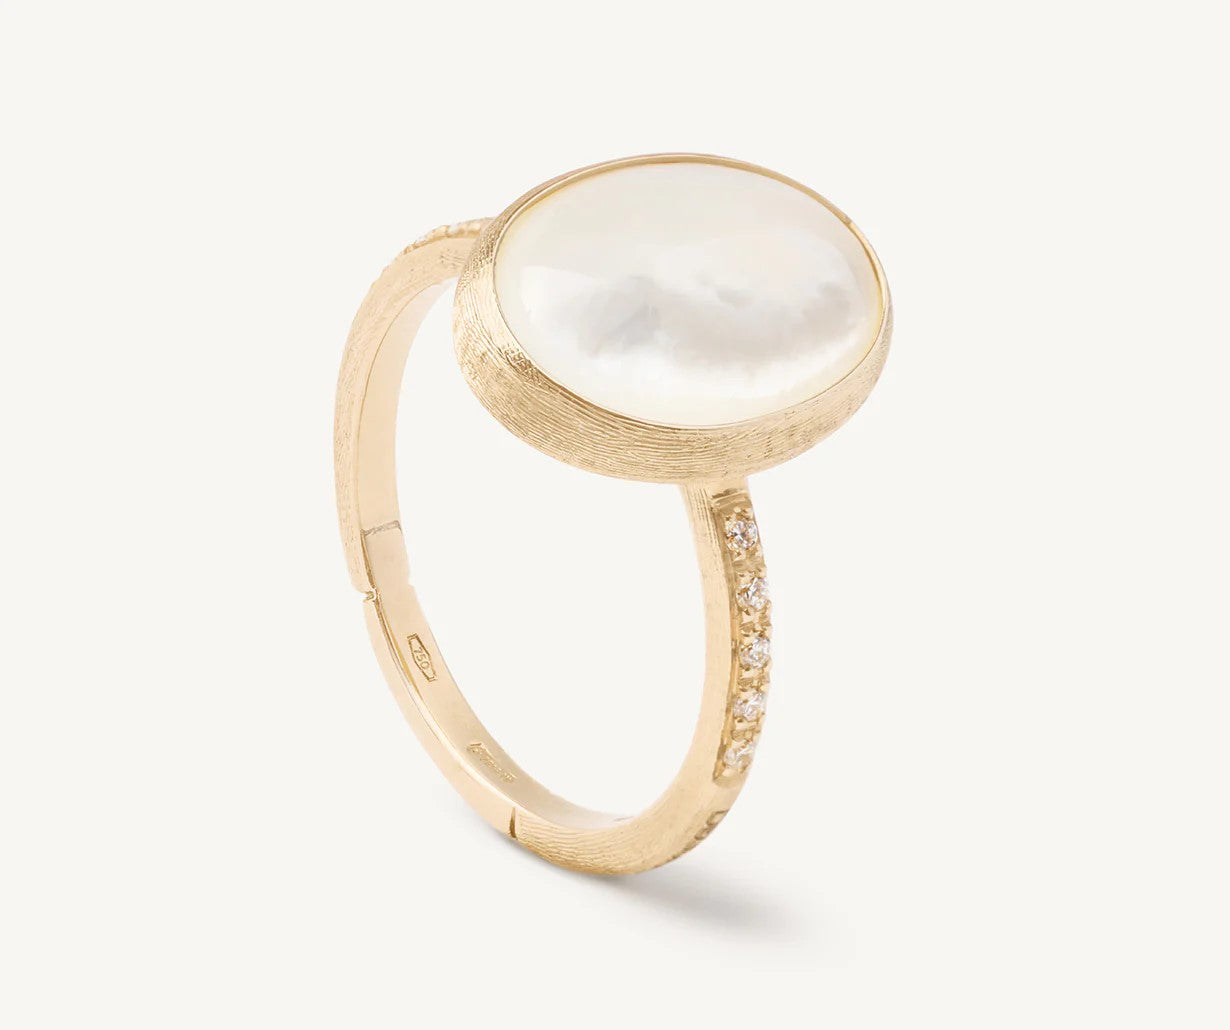 18K YELLOW GOLD MOTHER OF PEARL RING WITH DIAMOND PAVÉ SHANK FROM THE SIVIGLIA COLLECTION